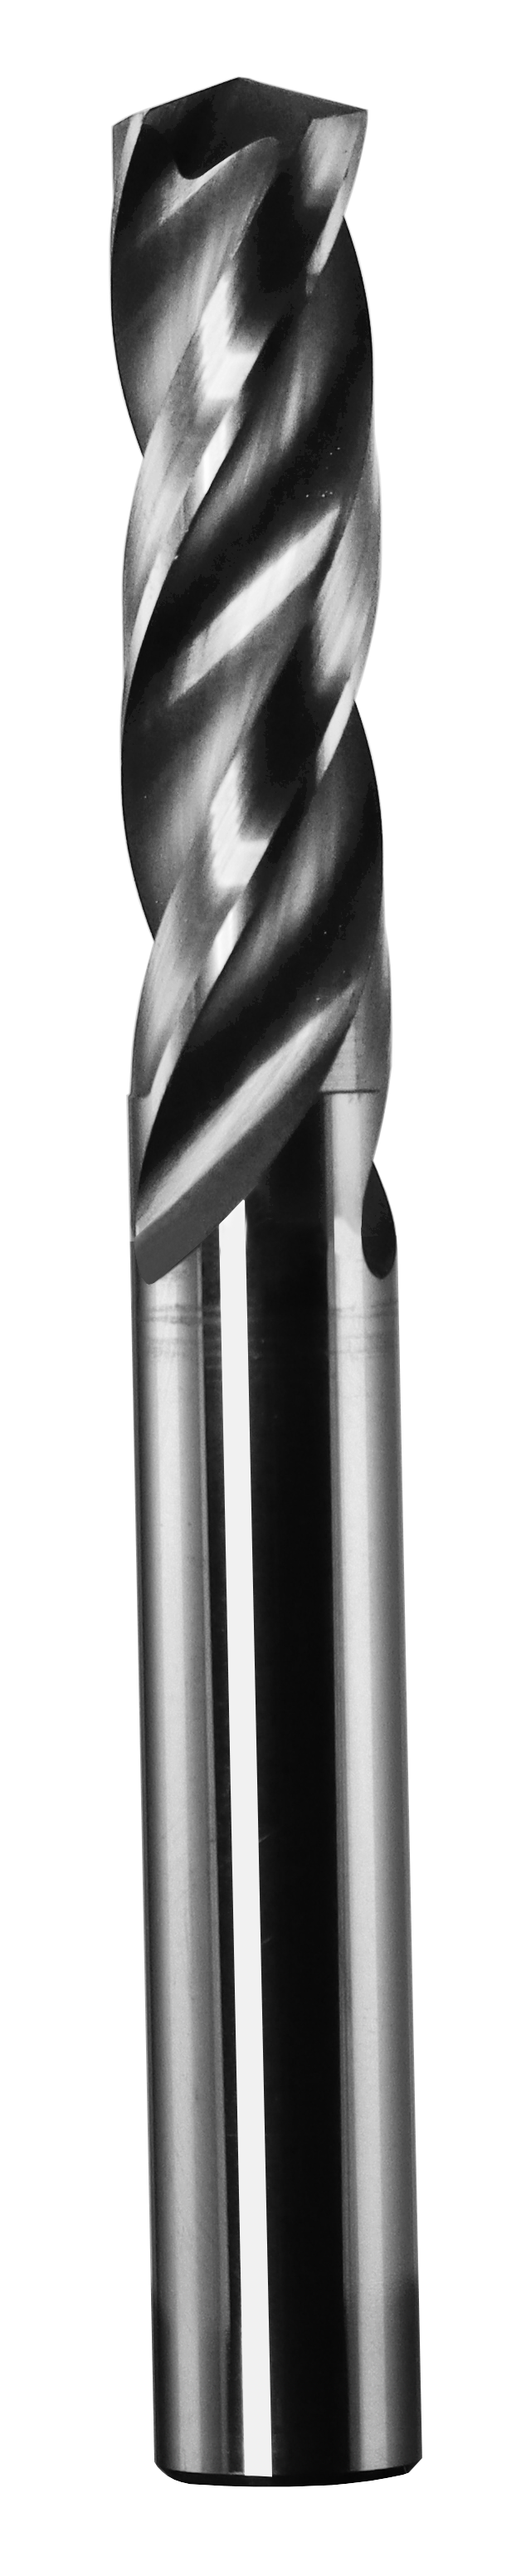 10.70mm Dia, 150 Degree Point, Solid Carbide Drill - 63030